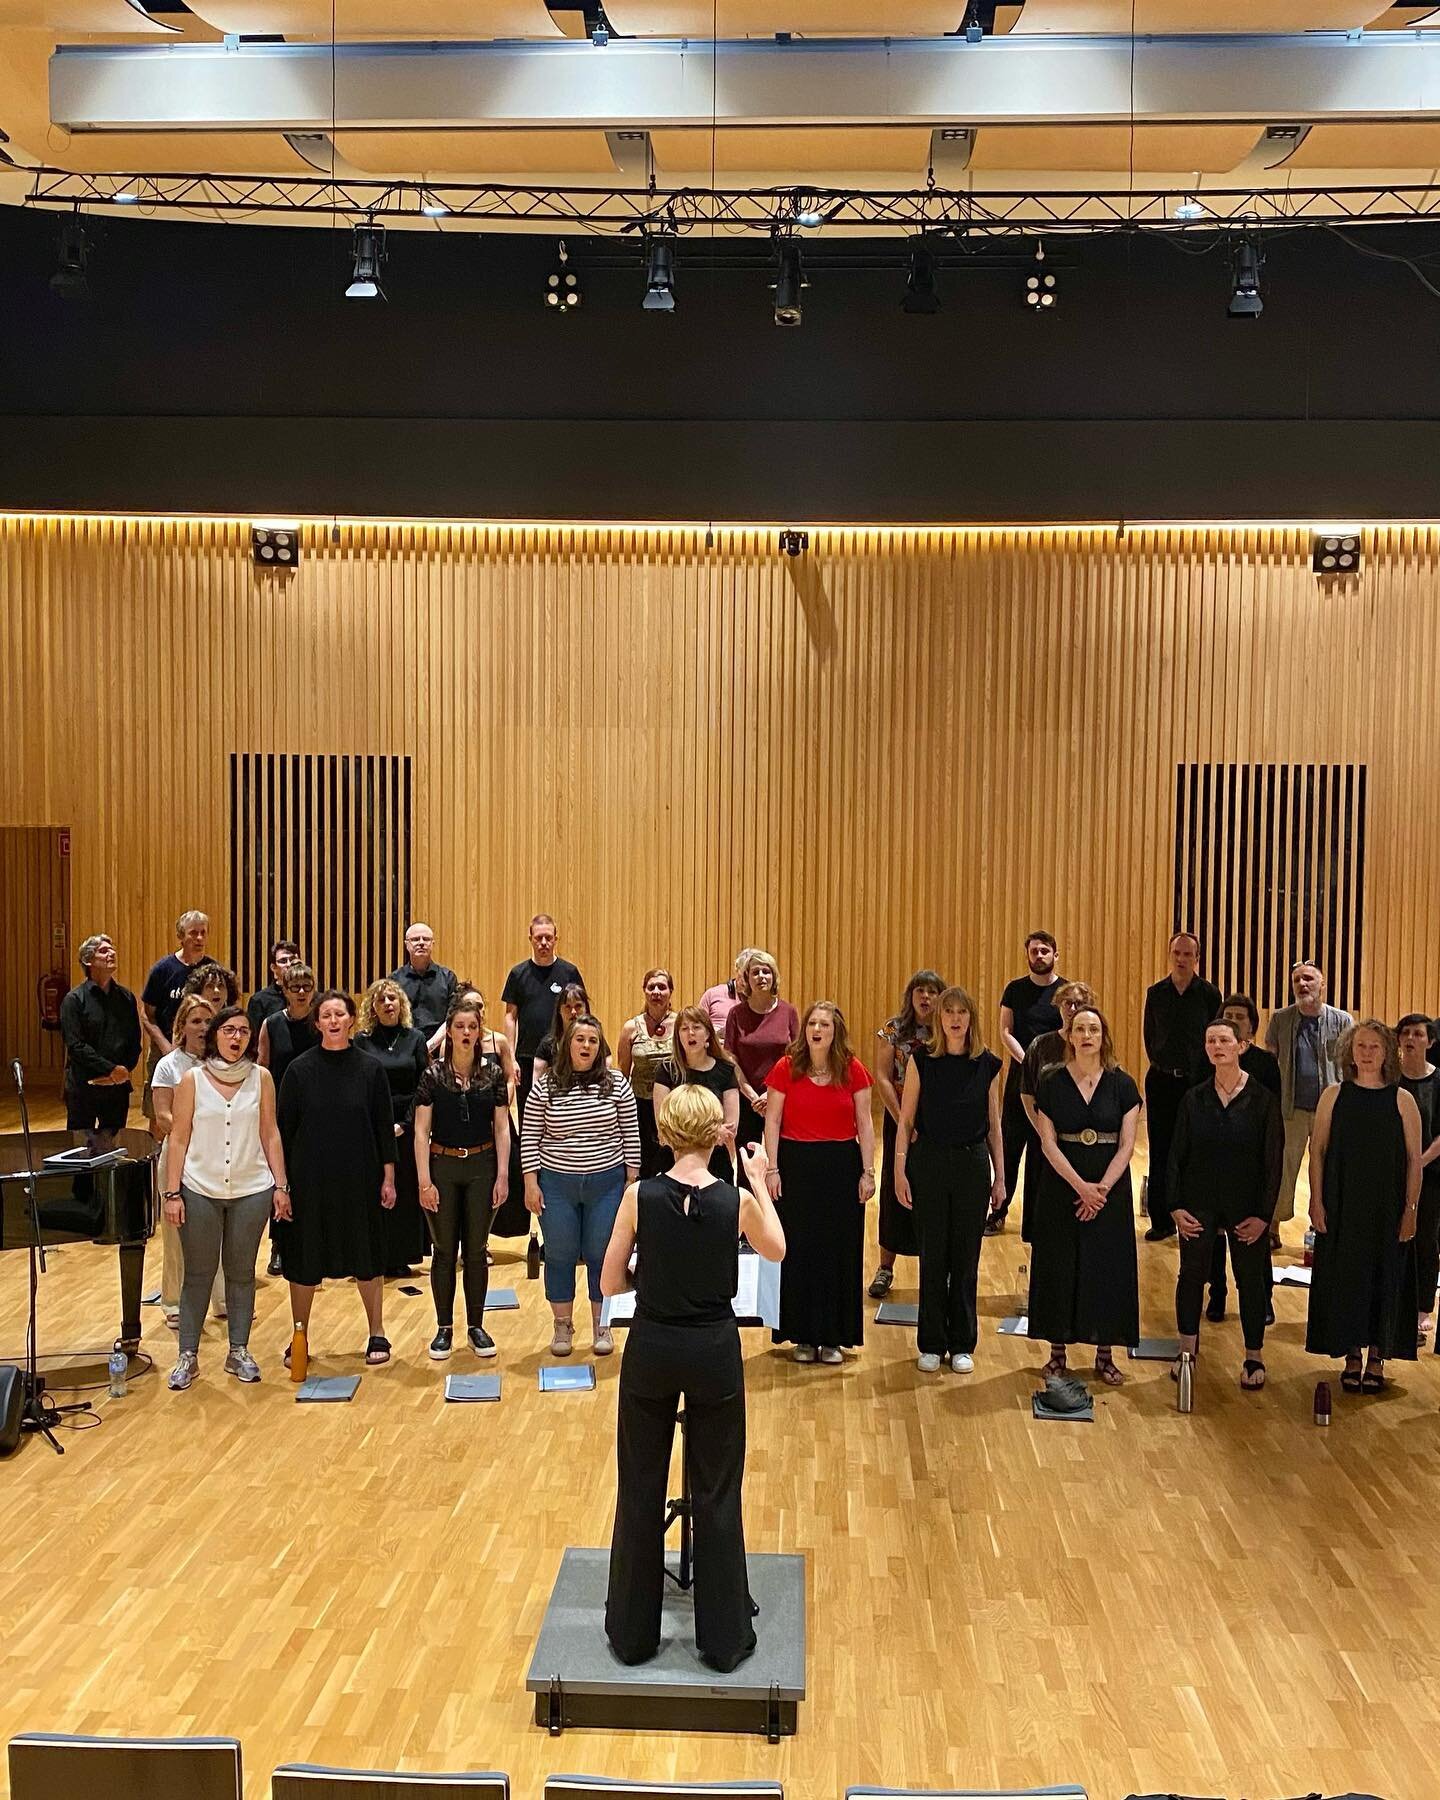 Rehearsing in the beautiful TU Dublin Conservatoire ahead of tonight&rsquo;s concert 🎵 

We can&rsquo;t wait to see you all there! 

@tudublinconservatoire @stoneybatterpop #MellowTonics #Choir #DublinConcert